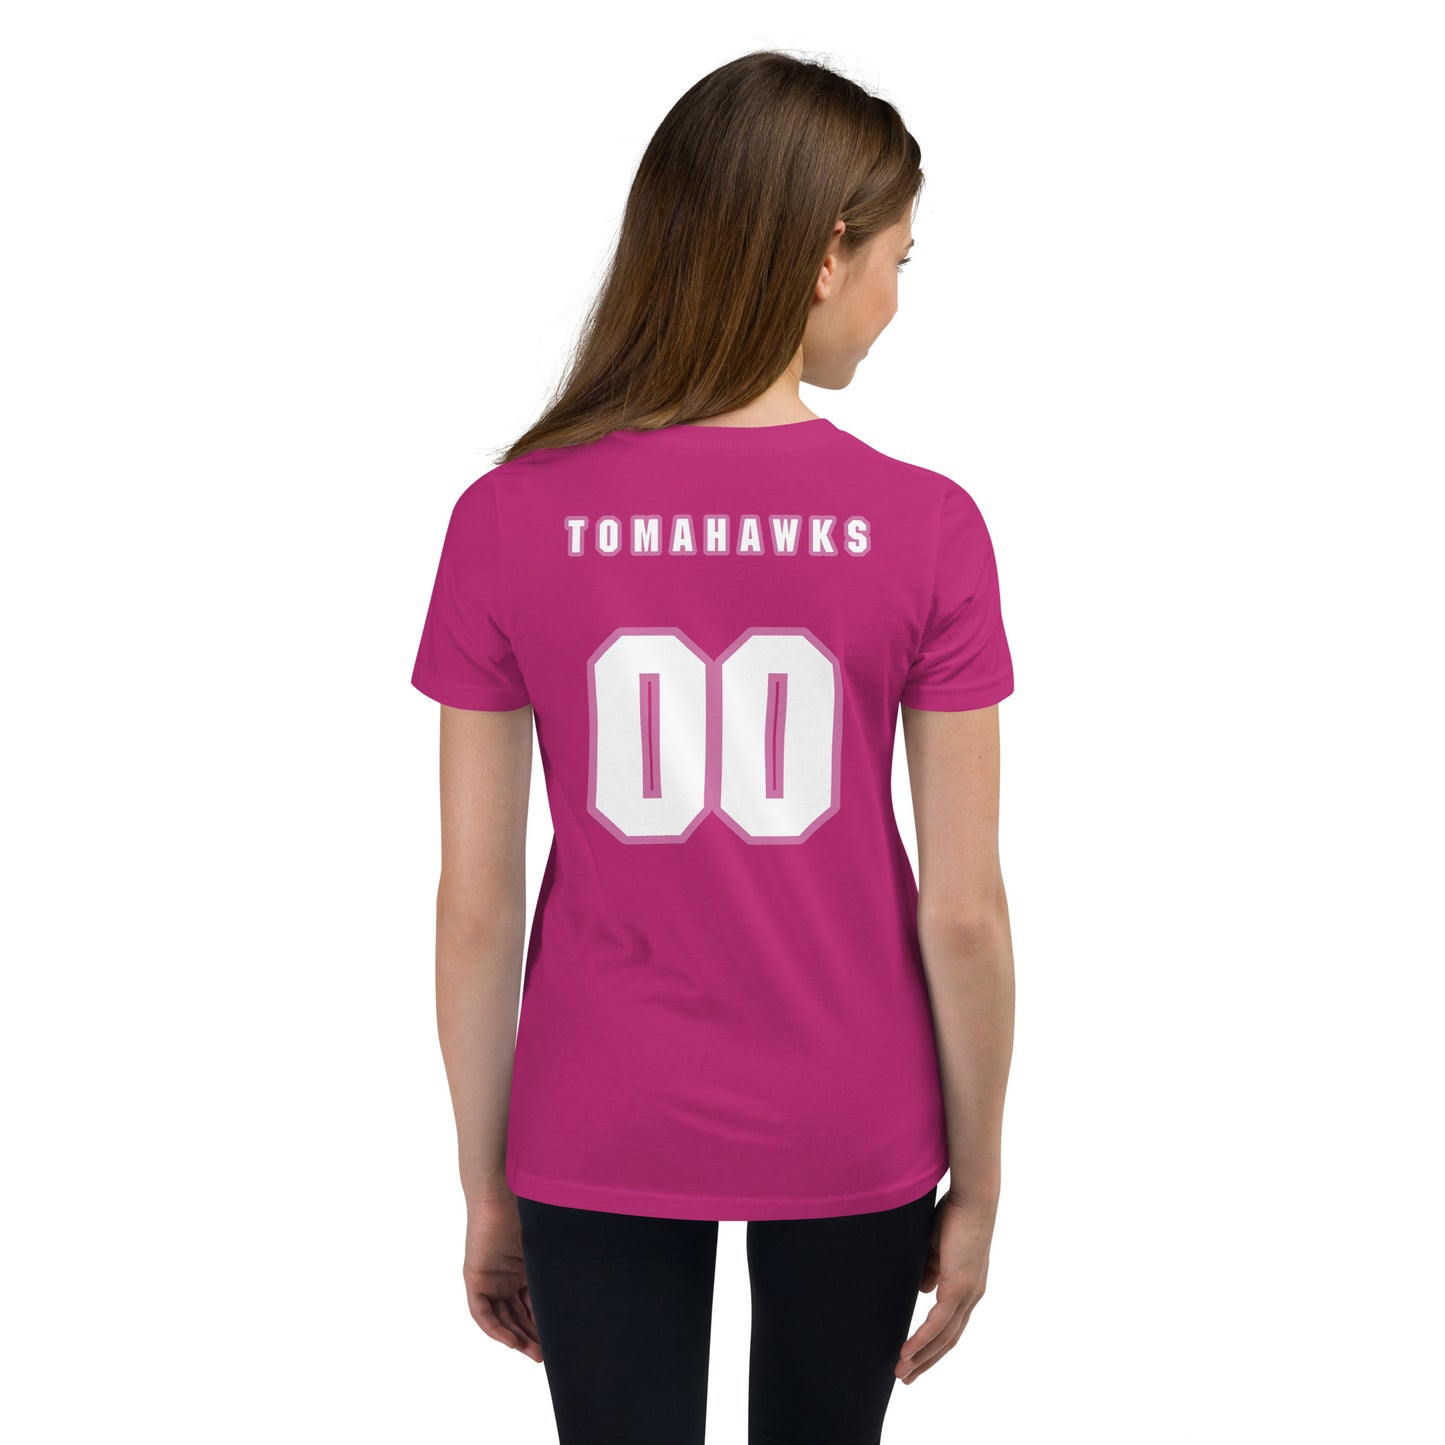 NTAA AB Softball Personalized Player Youth Short Sleeve T-Shirt